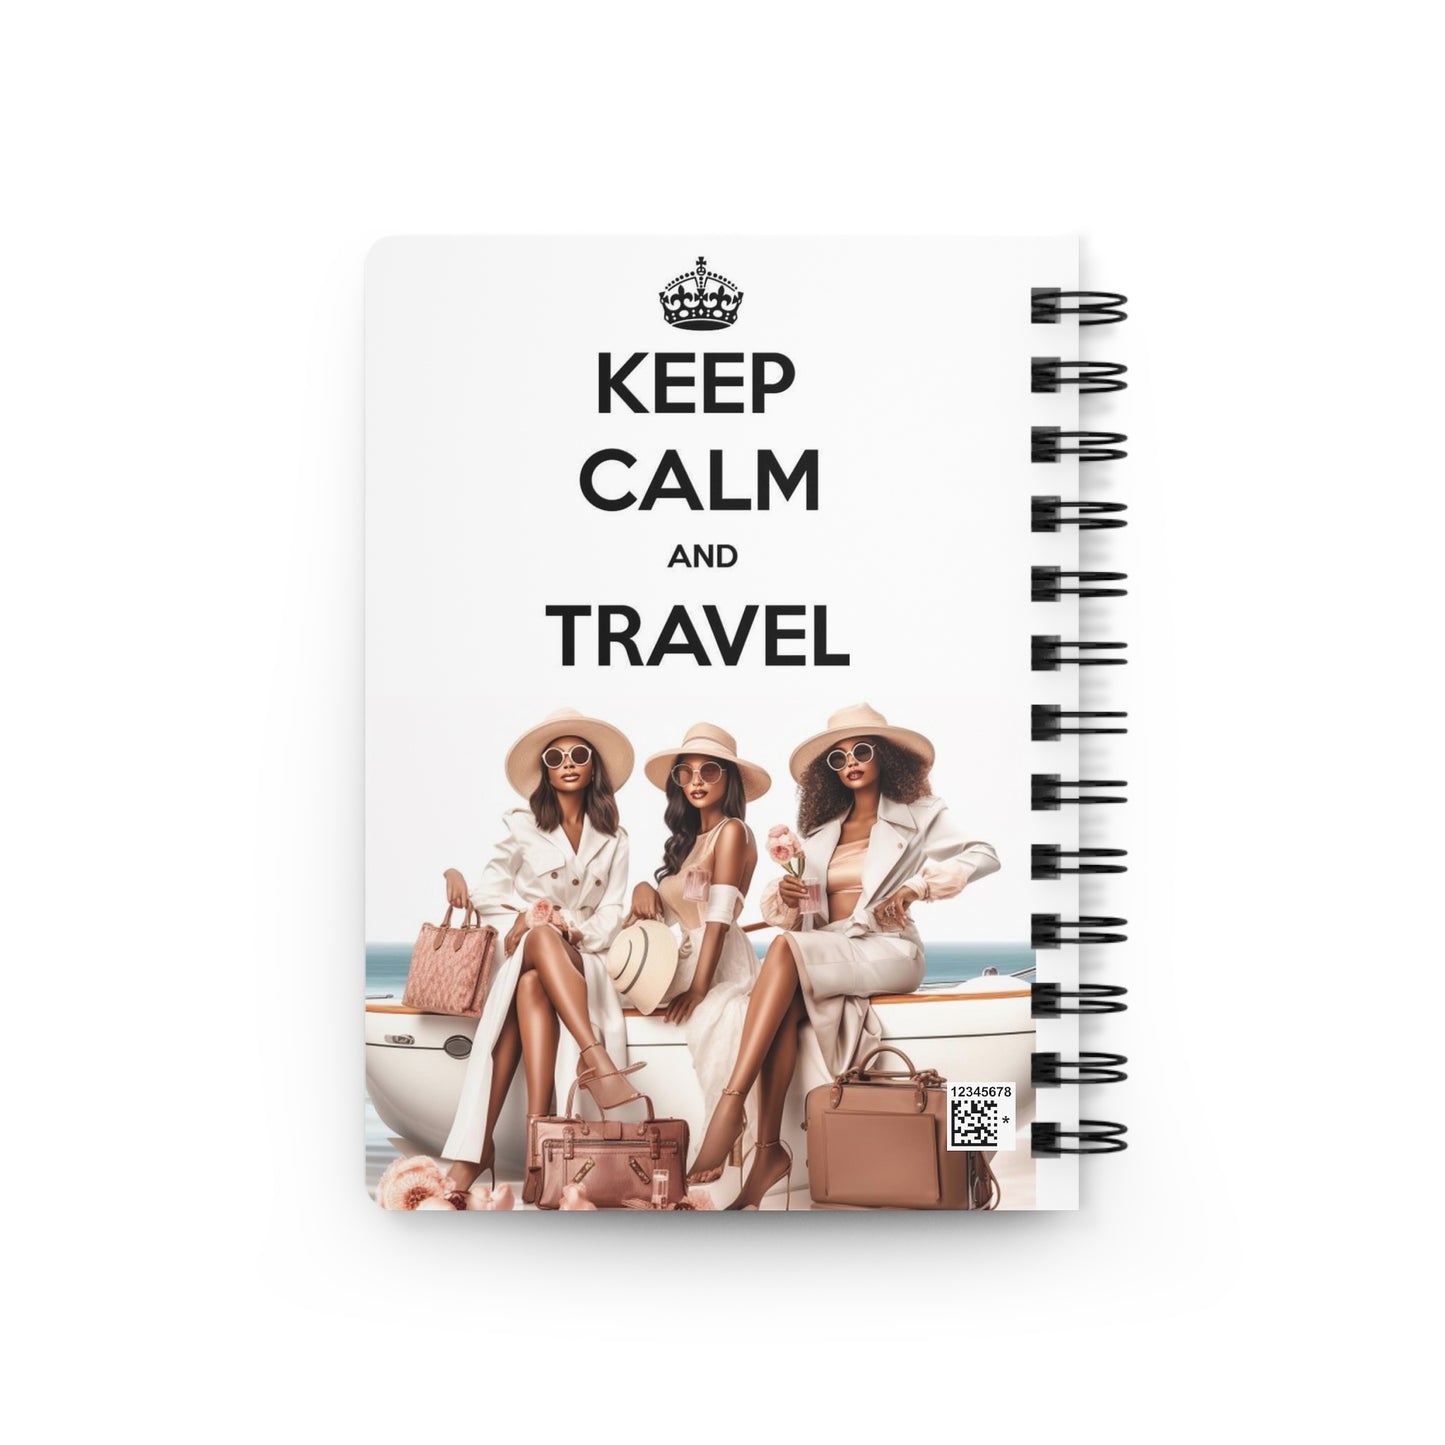 Traveler's Spiral-Bound Journal: Capture Your Journey (KEEP CALM AND TRAVEL)